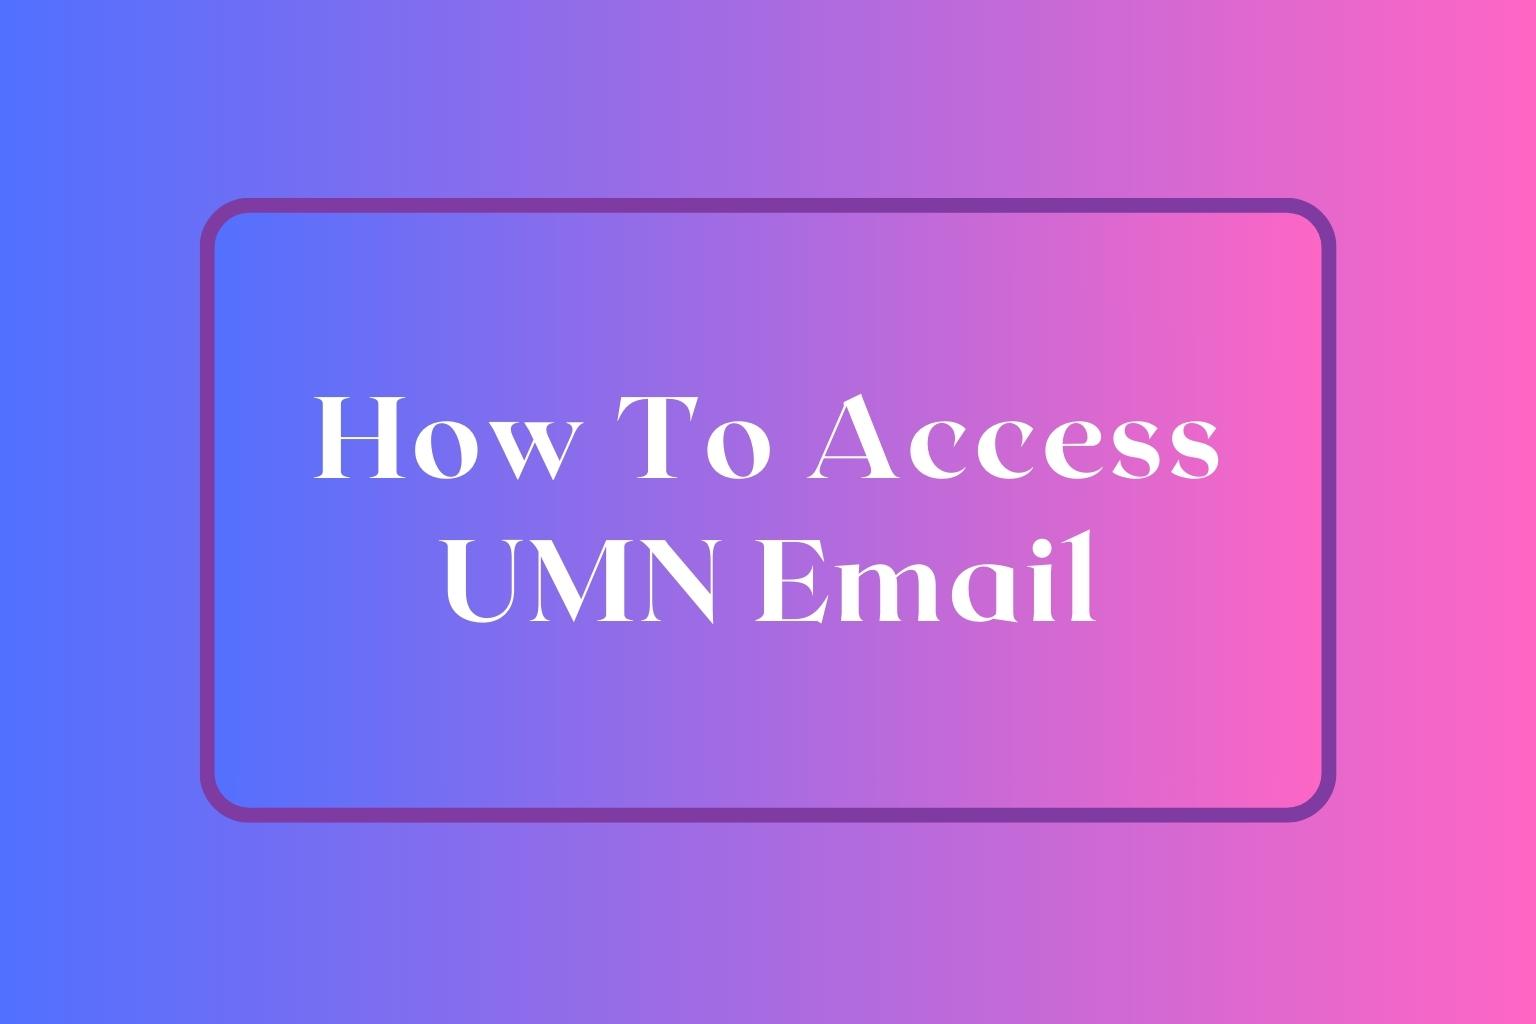 How To Access UMN Email